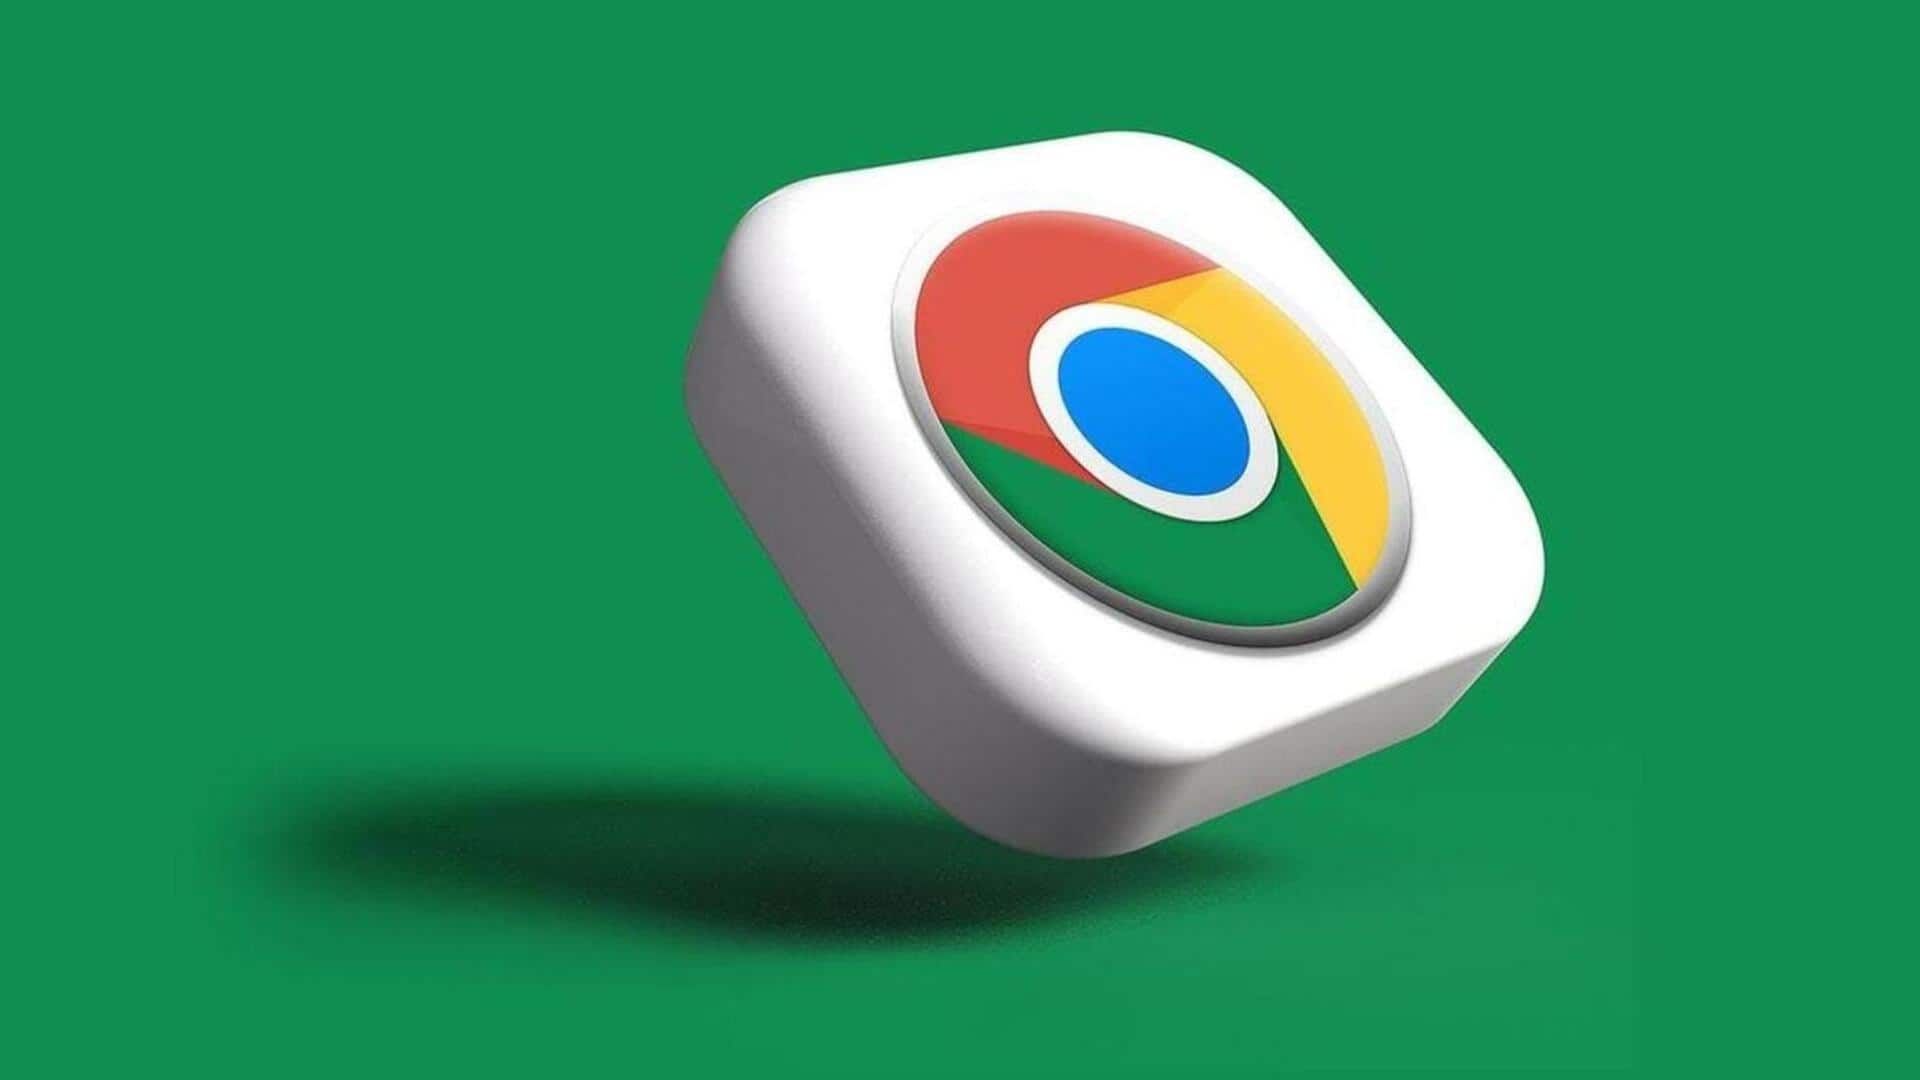 Chrome lets you track memory usage across tabs: Here's how